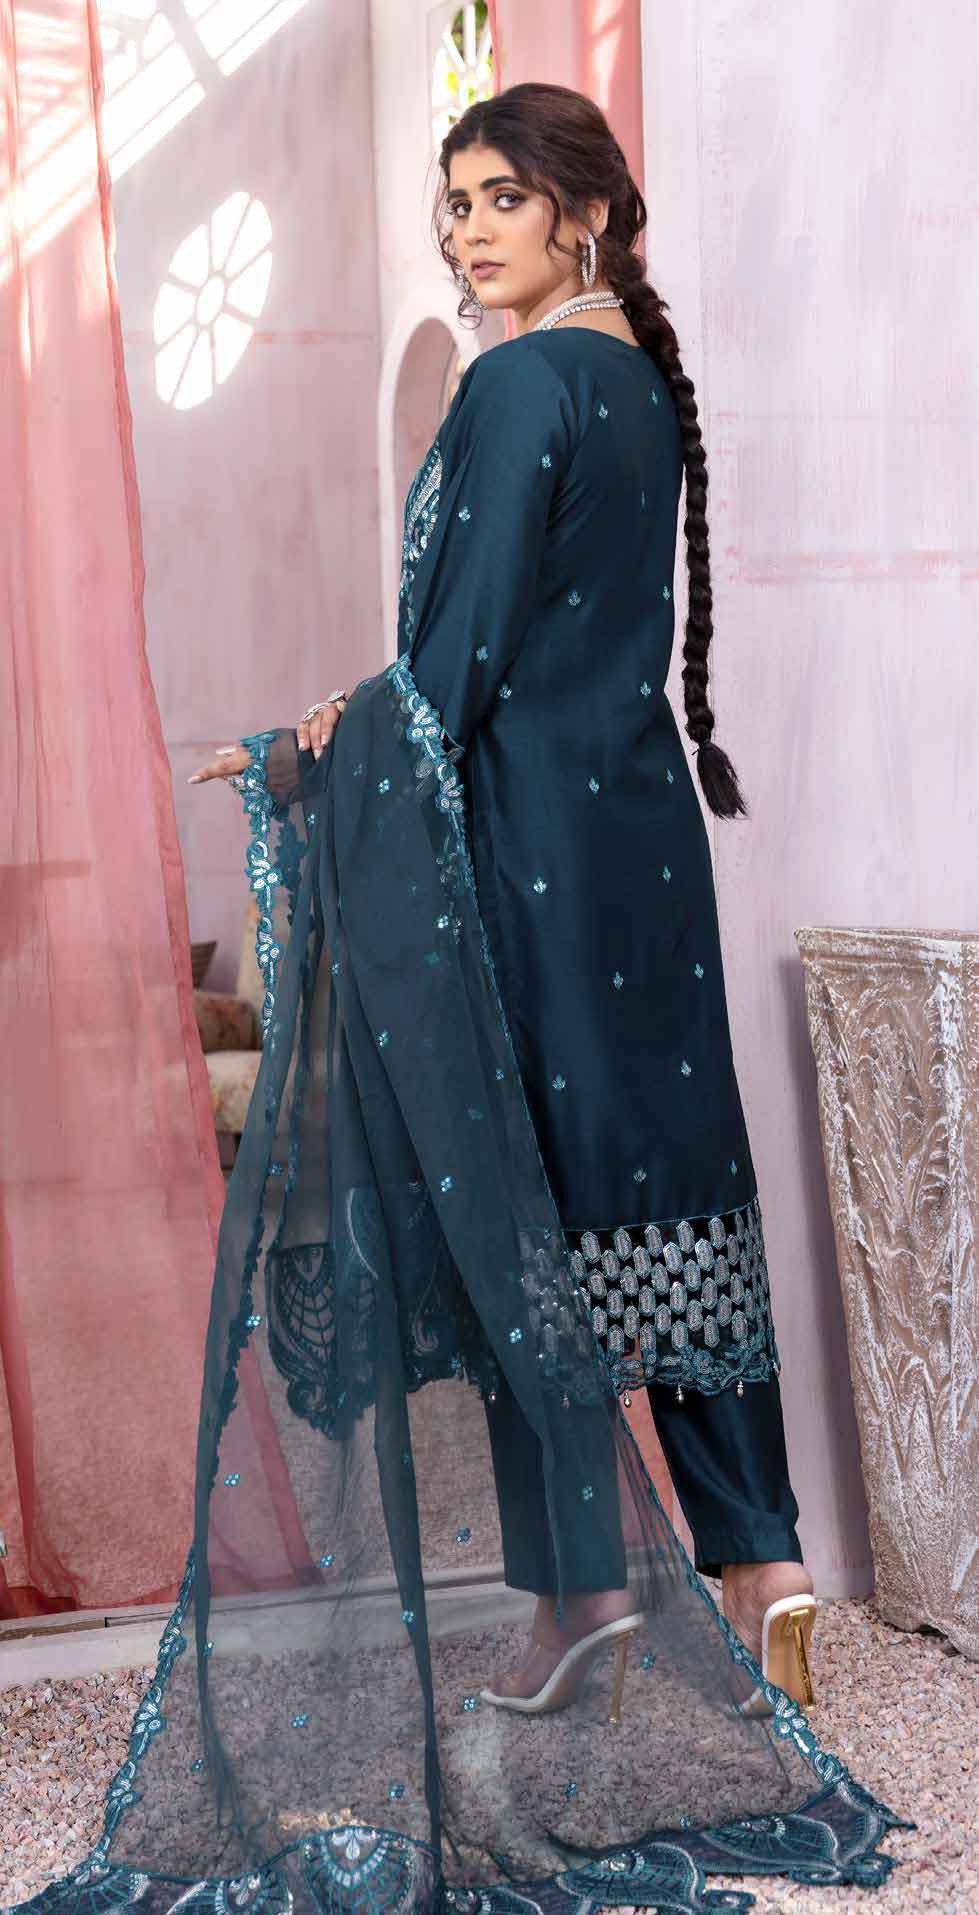 Simrans Wedding Edition Teal 3 Piece Embroidered Suit DesiPosh